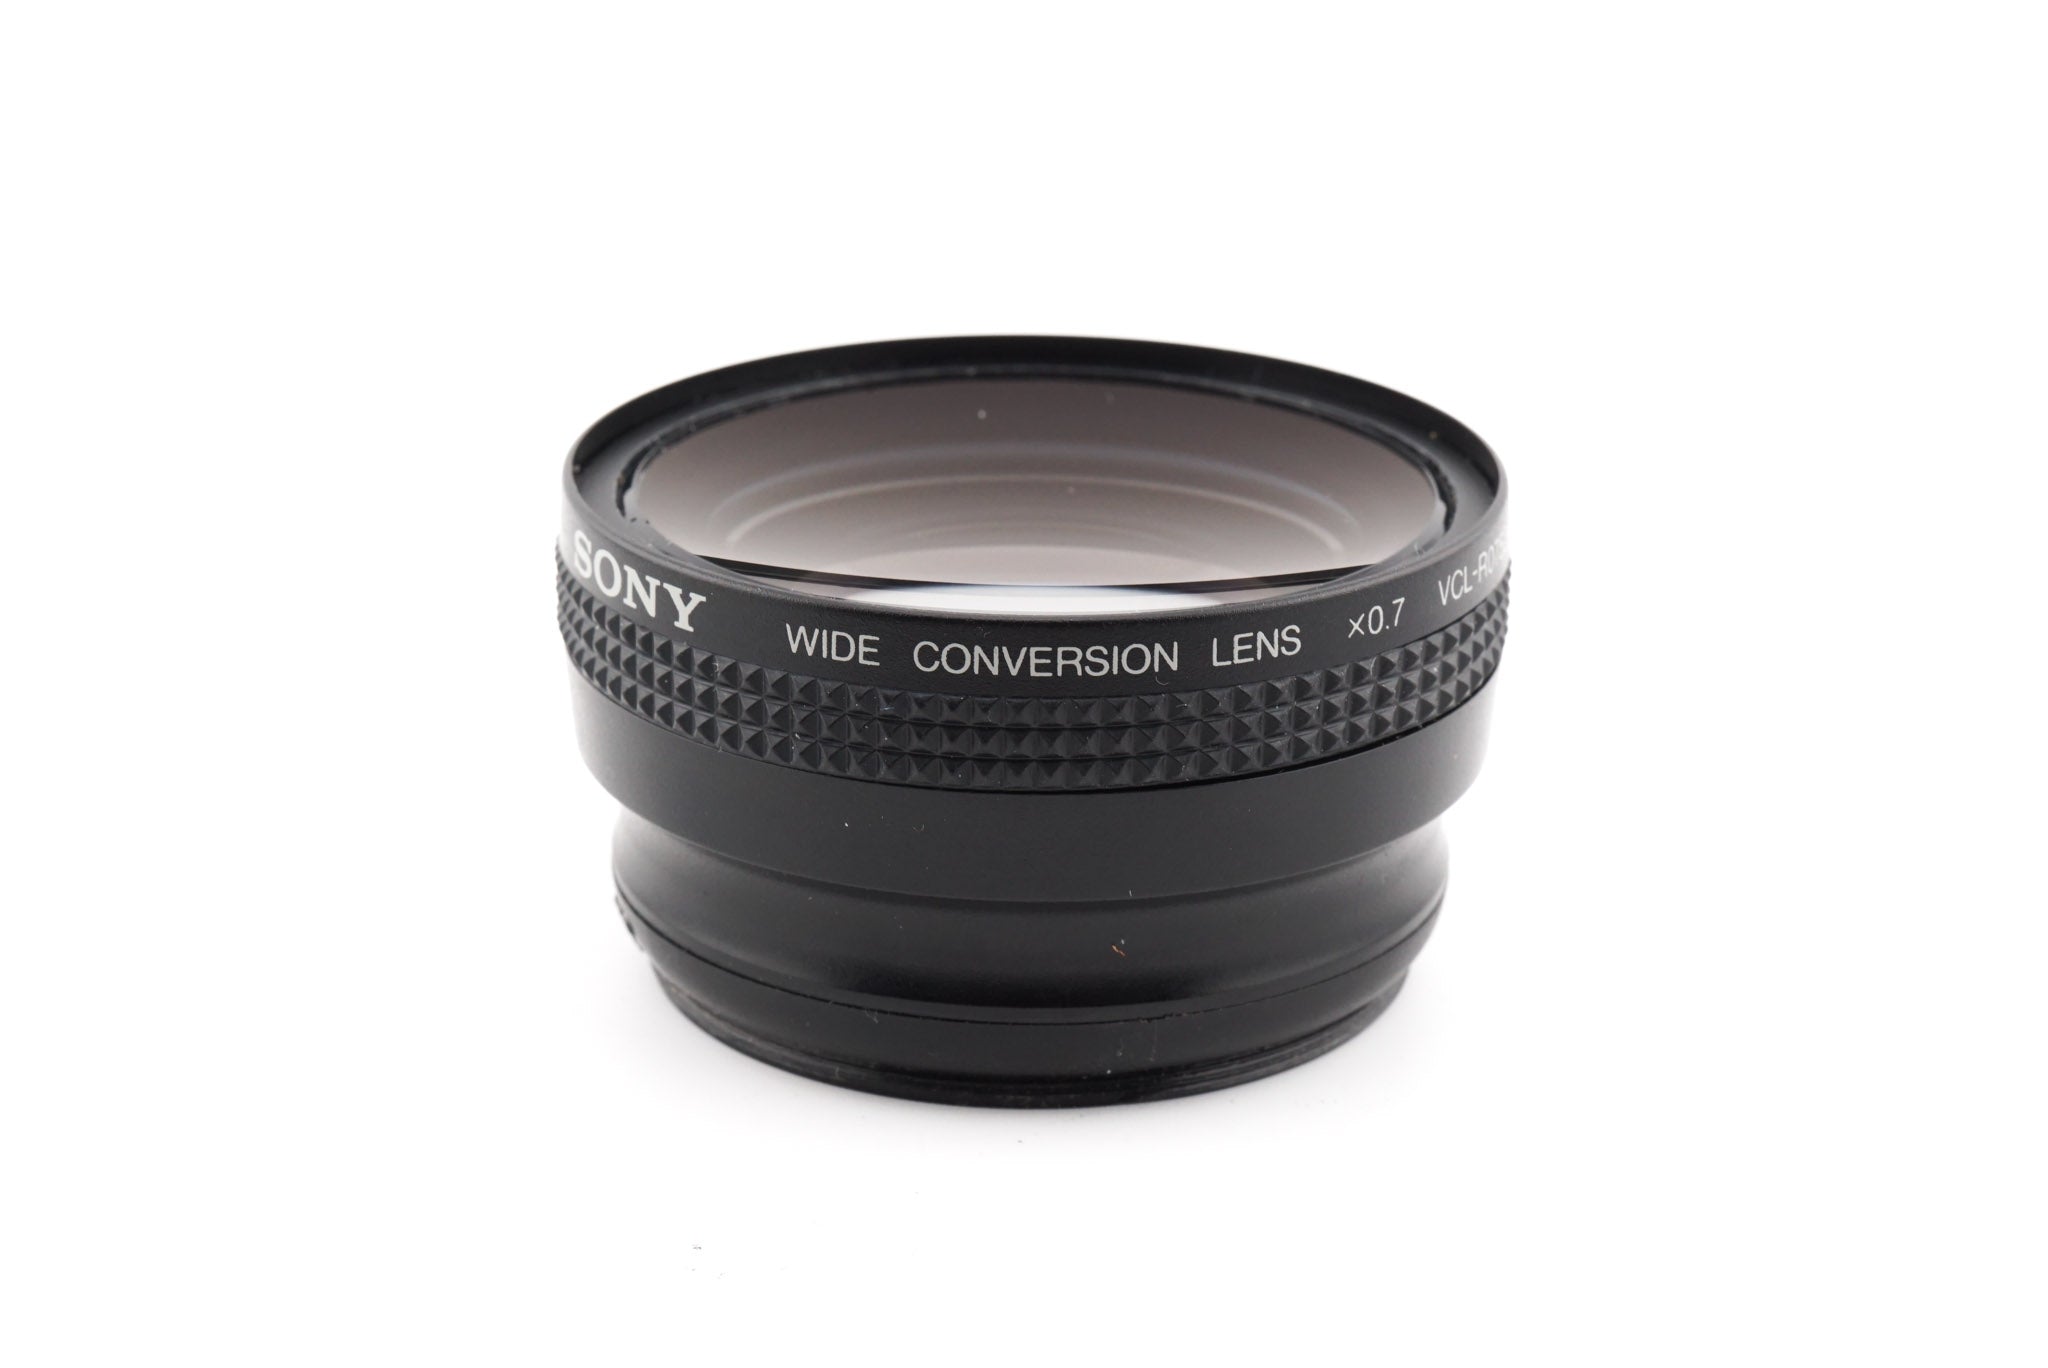 Sony Wide Conversion Lens x0.7 VCL-R0752 - Accessory